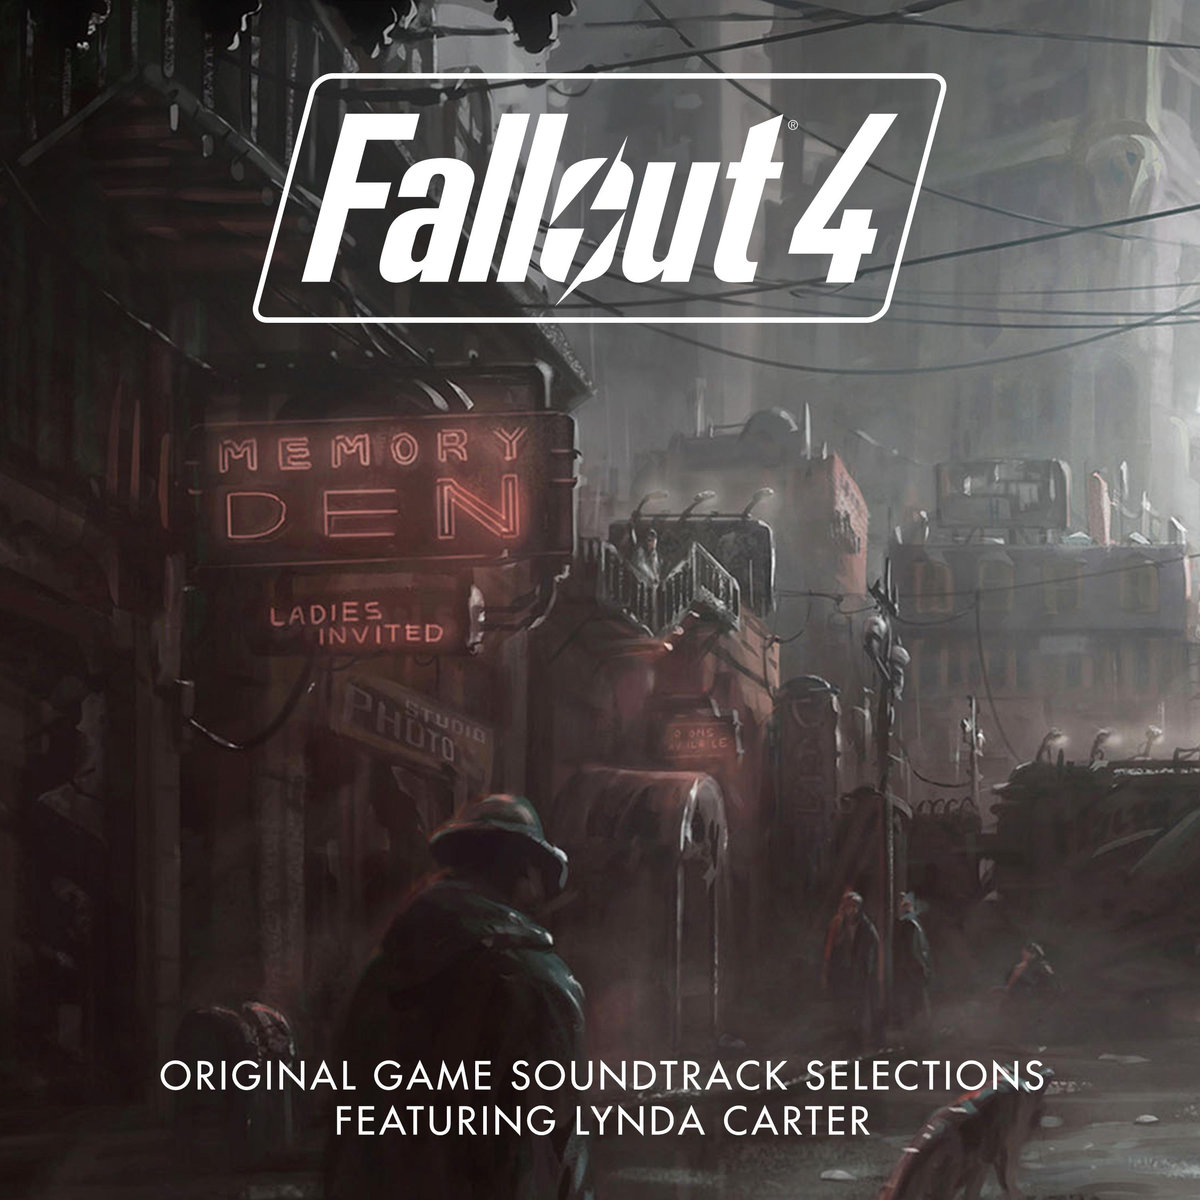 Music from fallout 4 фото 2